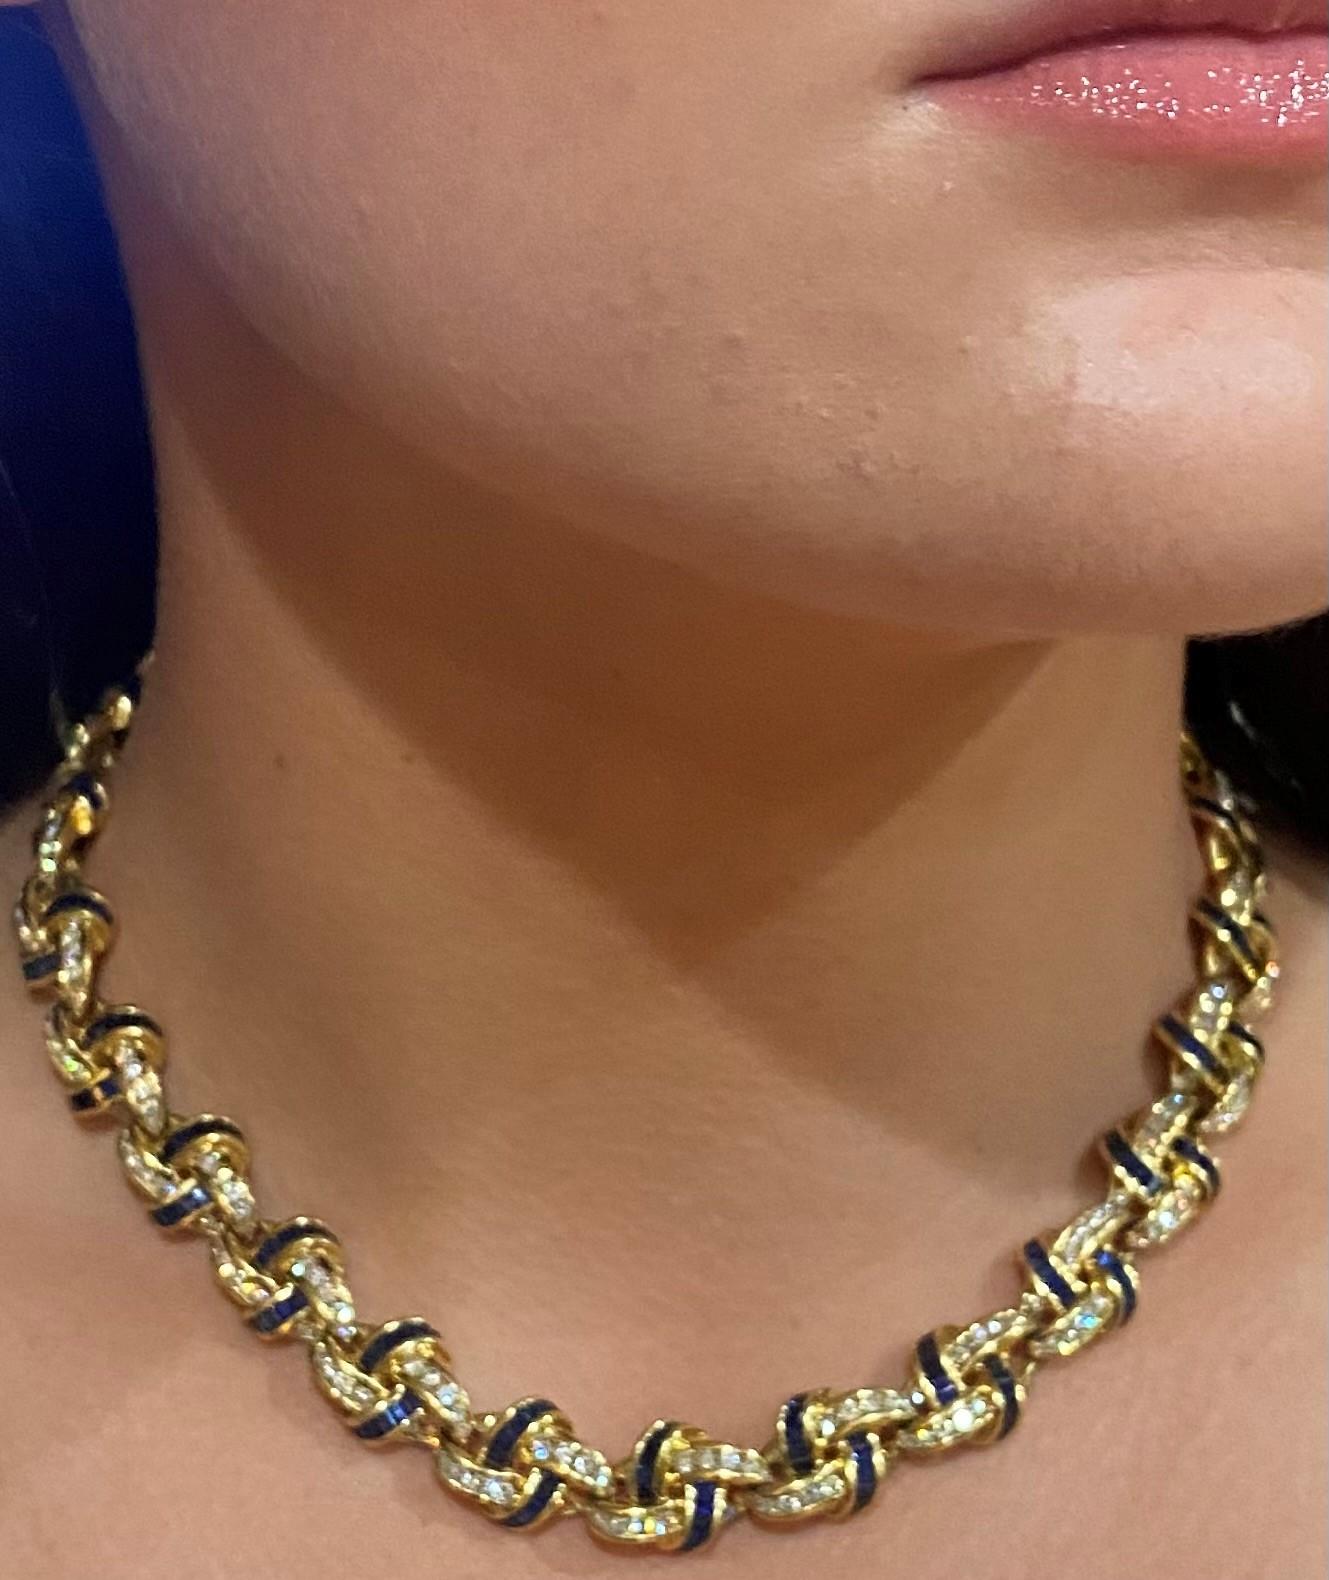 Charles Krypell 18K Yellow Gold Sapphire and Diamond Necklace. 
This is a magnificent Sapphire and Diamond Necklace by Charles Krypell.  Krypell's design approach stems from three decades of creating timeless jewelry for the sophisticated collector.